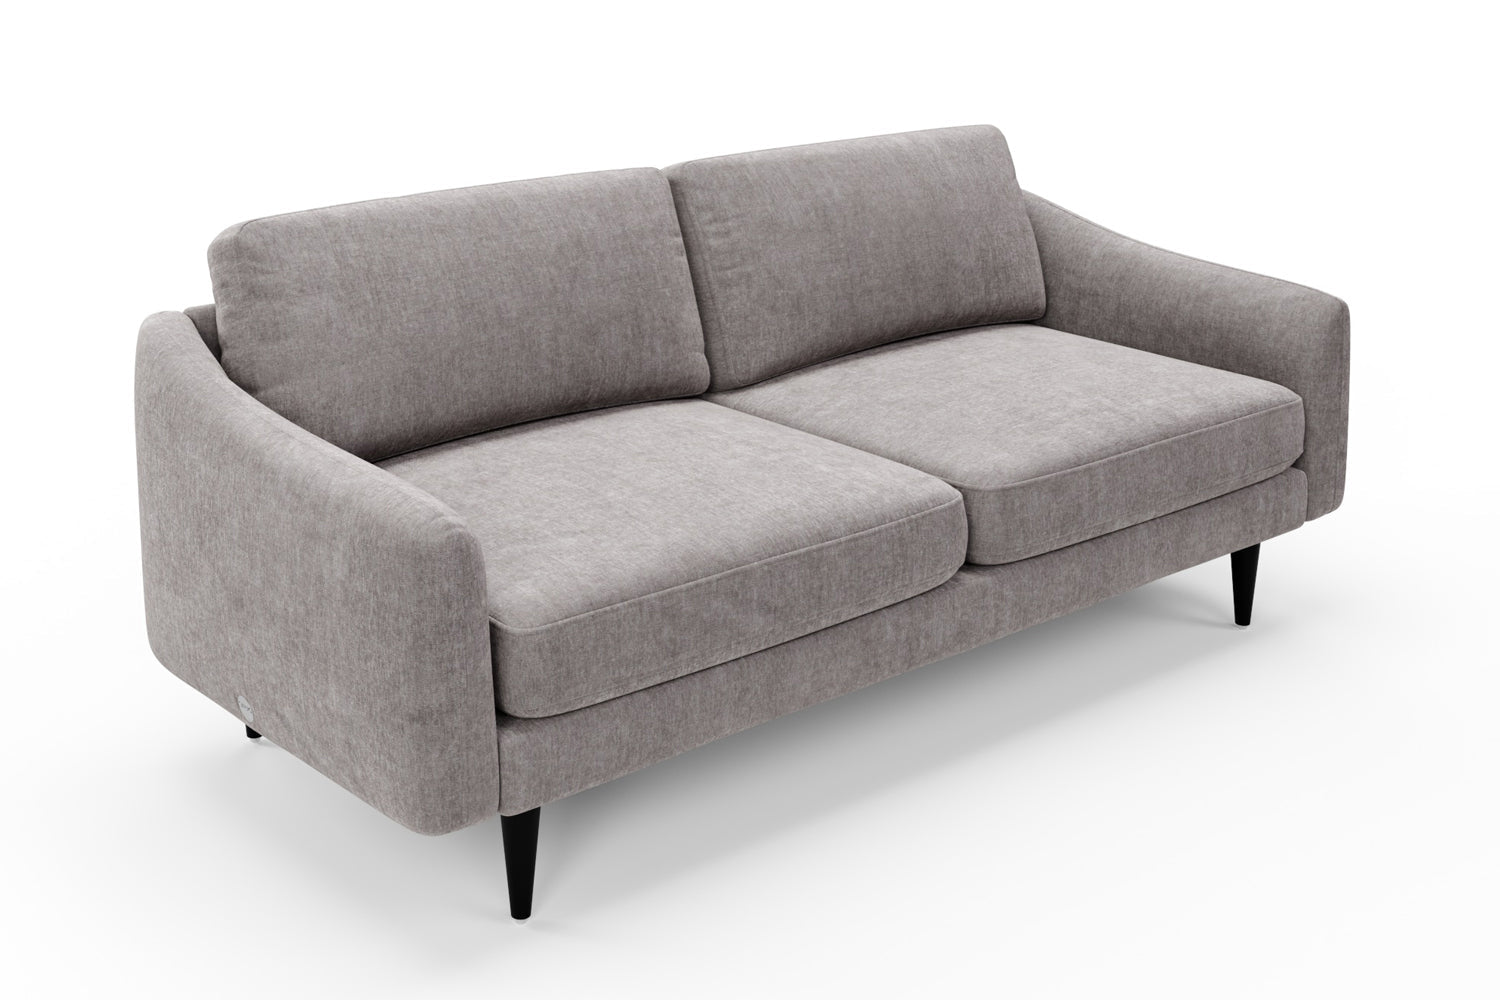 A simple yet stunning couch that'll effortlessly vibe with whatever  aesthetic you're working with. Also, it looks super comfy — like really,  really comfy.